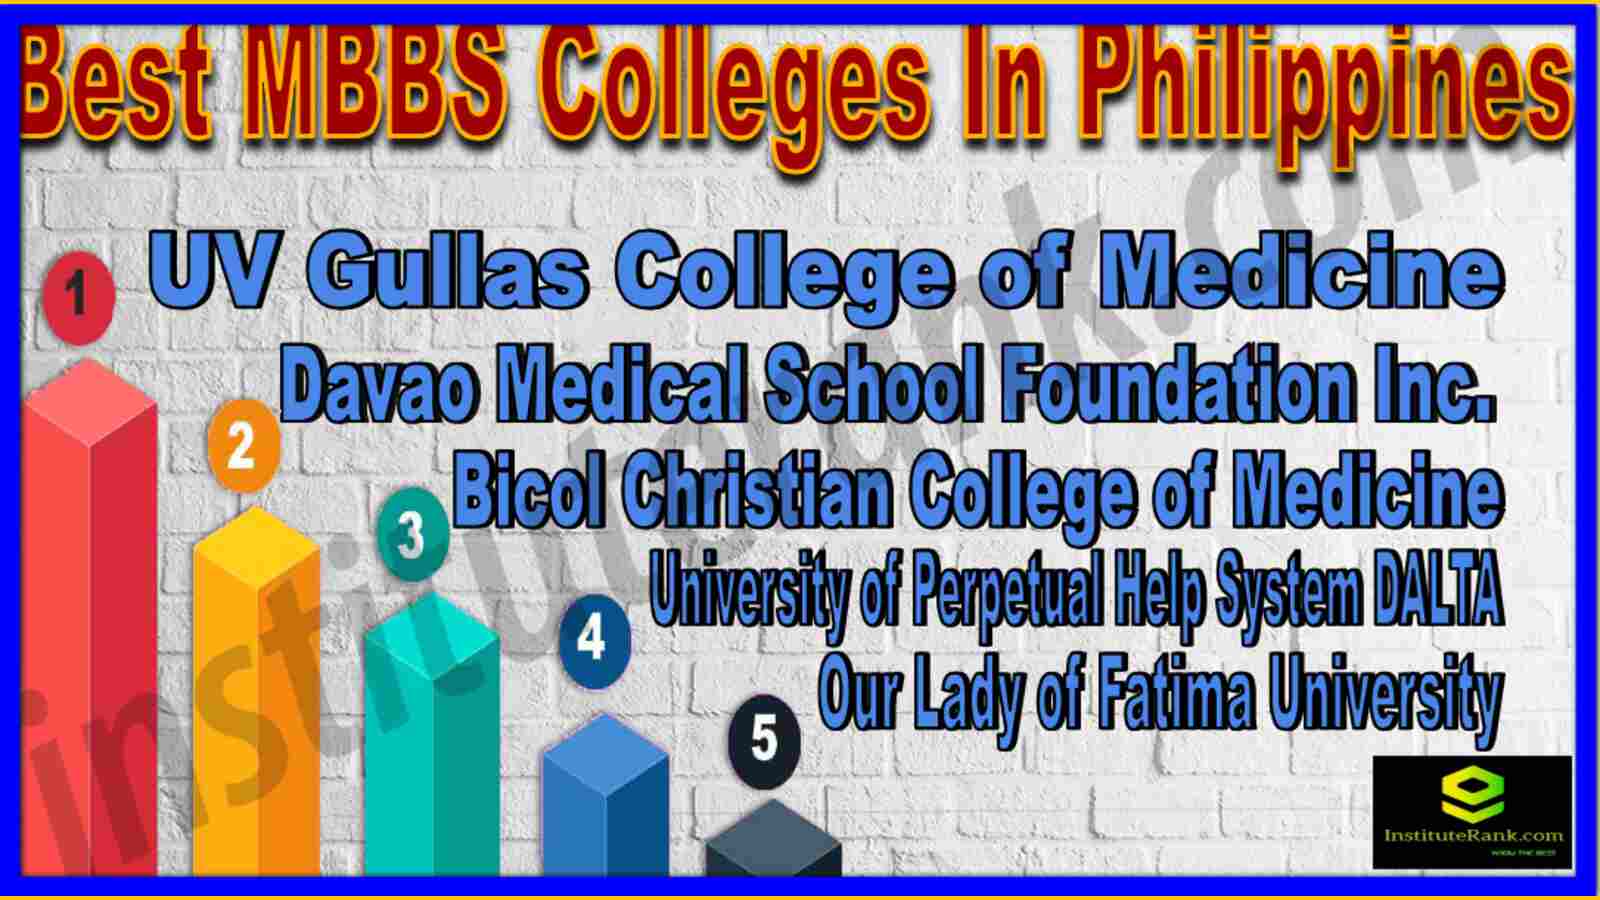 Best MBBS Colleges In Philippines